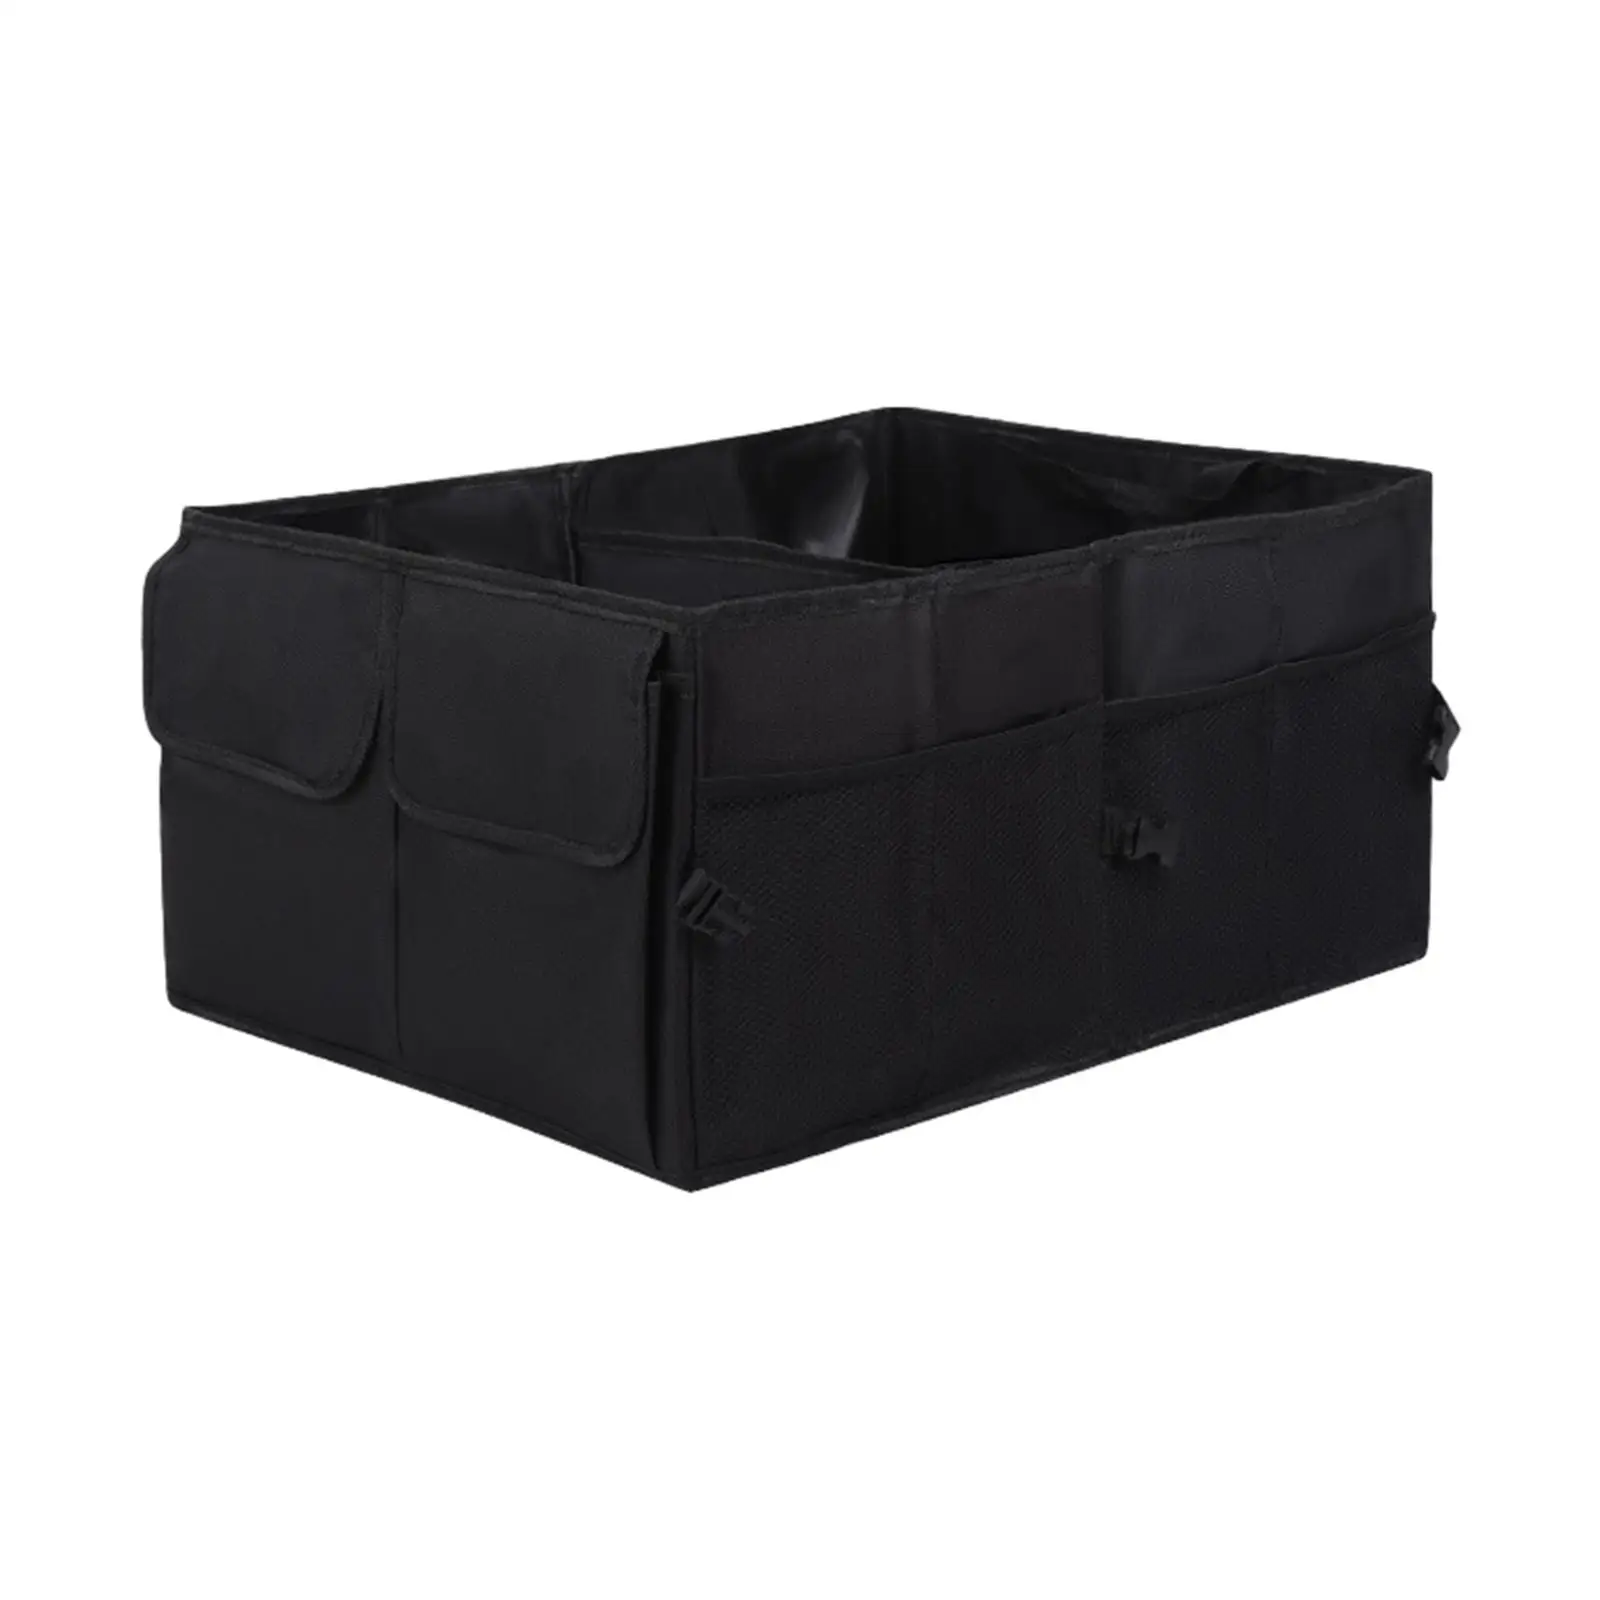 SUV Trunk Organizer ,Collapsible Cargo Storage Container ,Portable Grocery Cargo Container Car Trunk Storage Bag for Truck